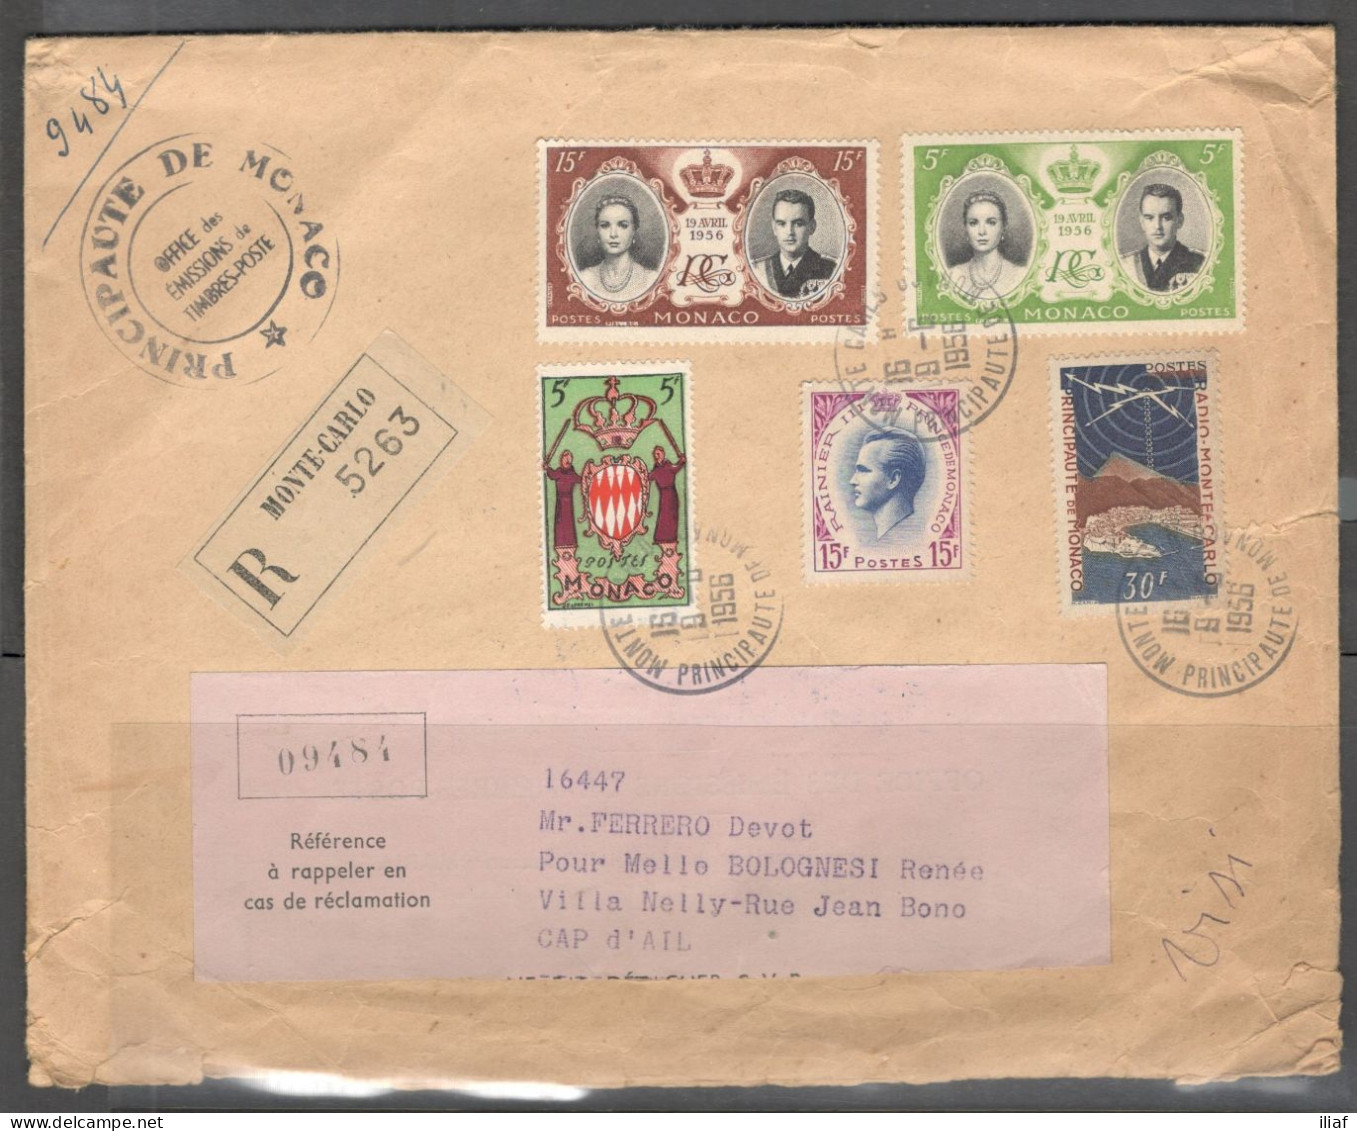 Monaco. Stamps Sc. 280, 318, 337, 369-370 On Registered Letter, Sent From Monte-Carlo, Monaco On 9.06.1956 To Cap-d'Ail - Briefe U. Dokumente